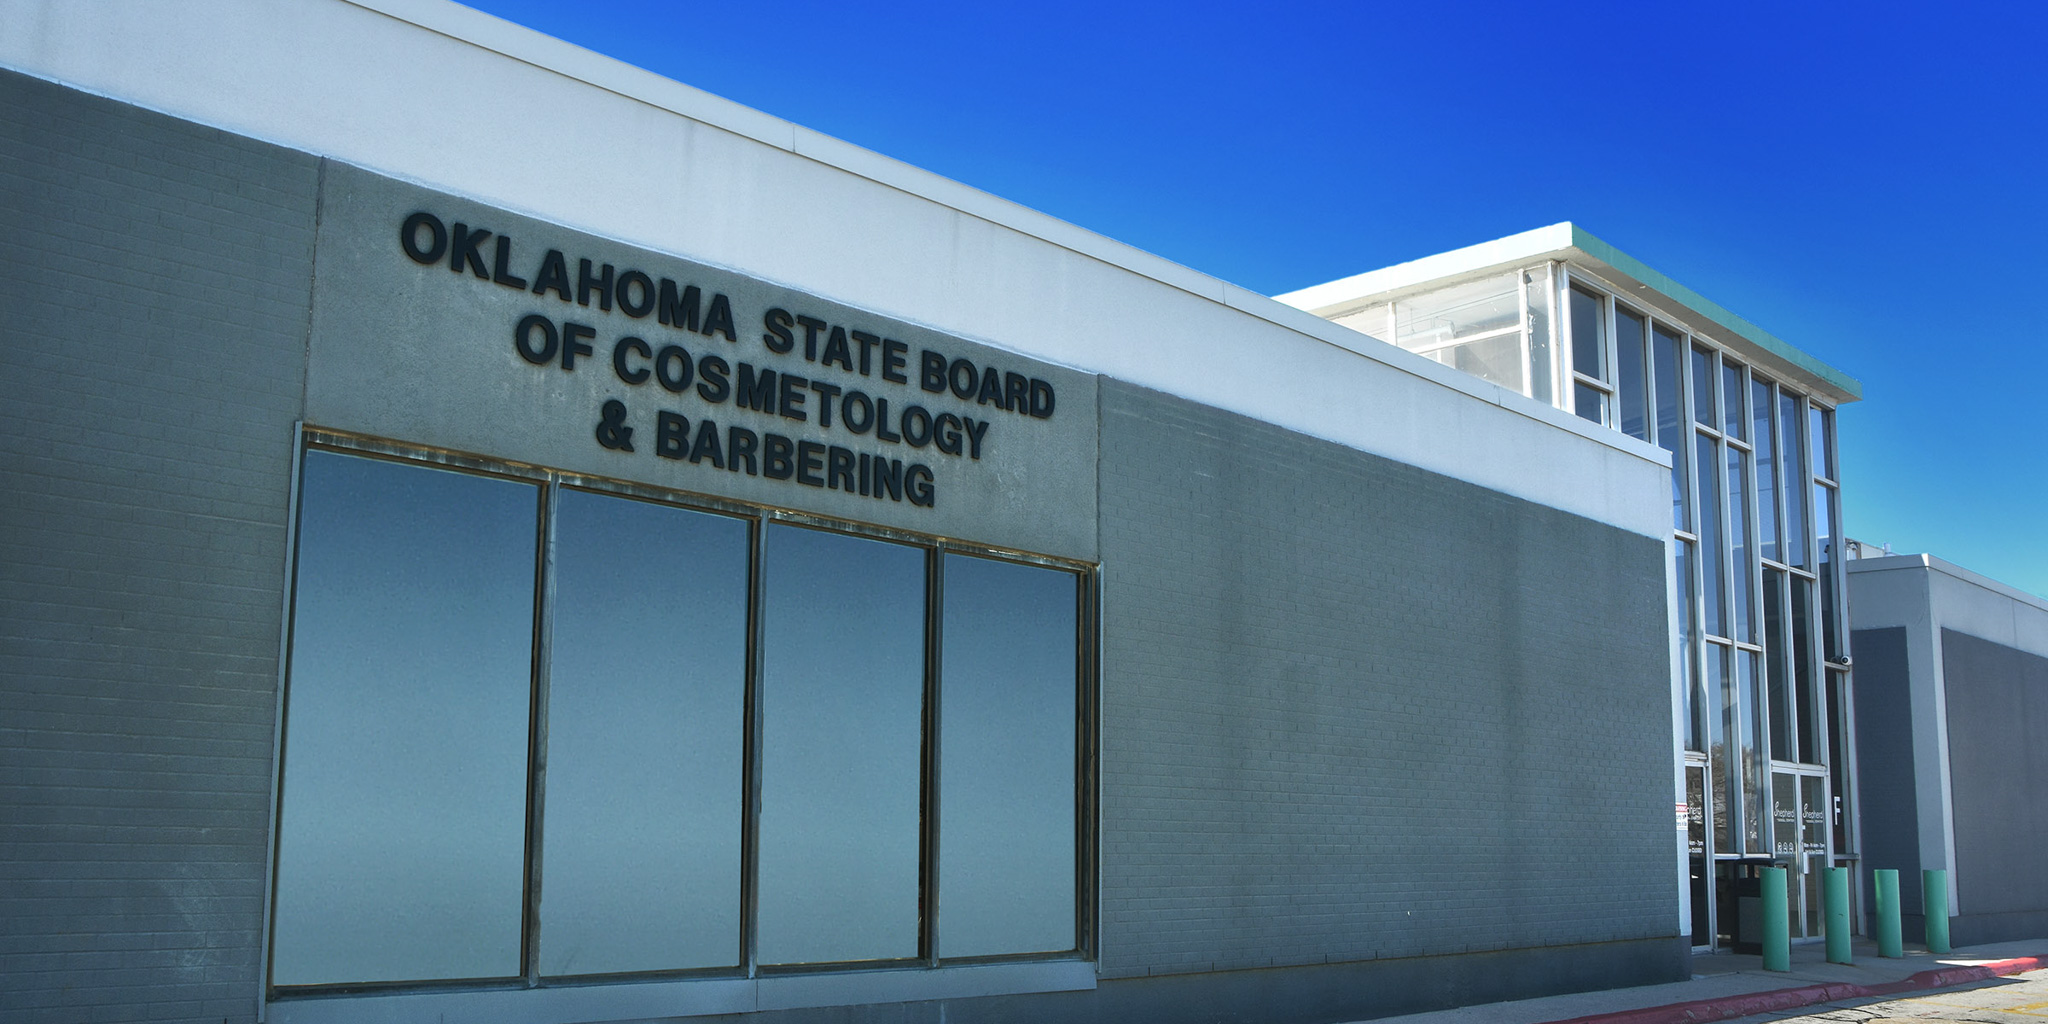 Oklahoma State Board of Cosmetology & Barbering Agency